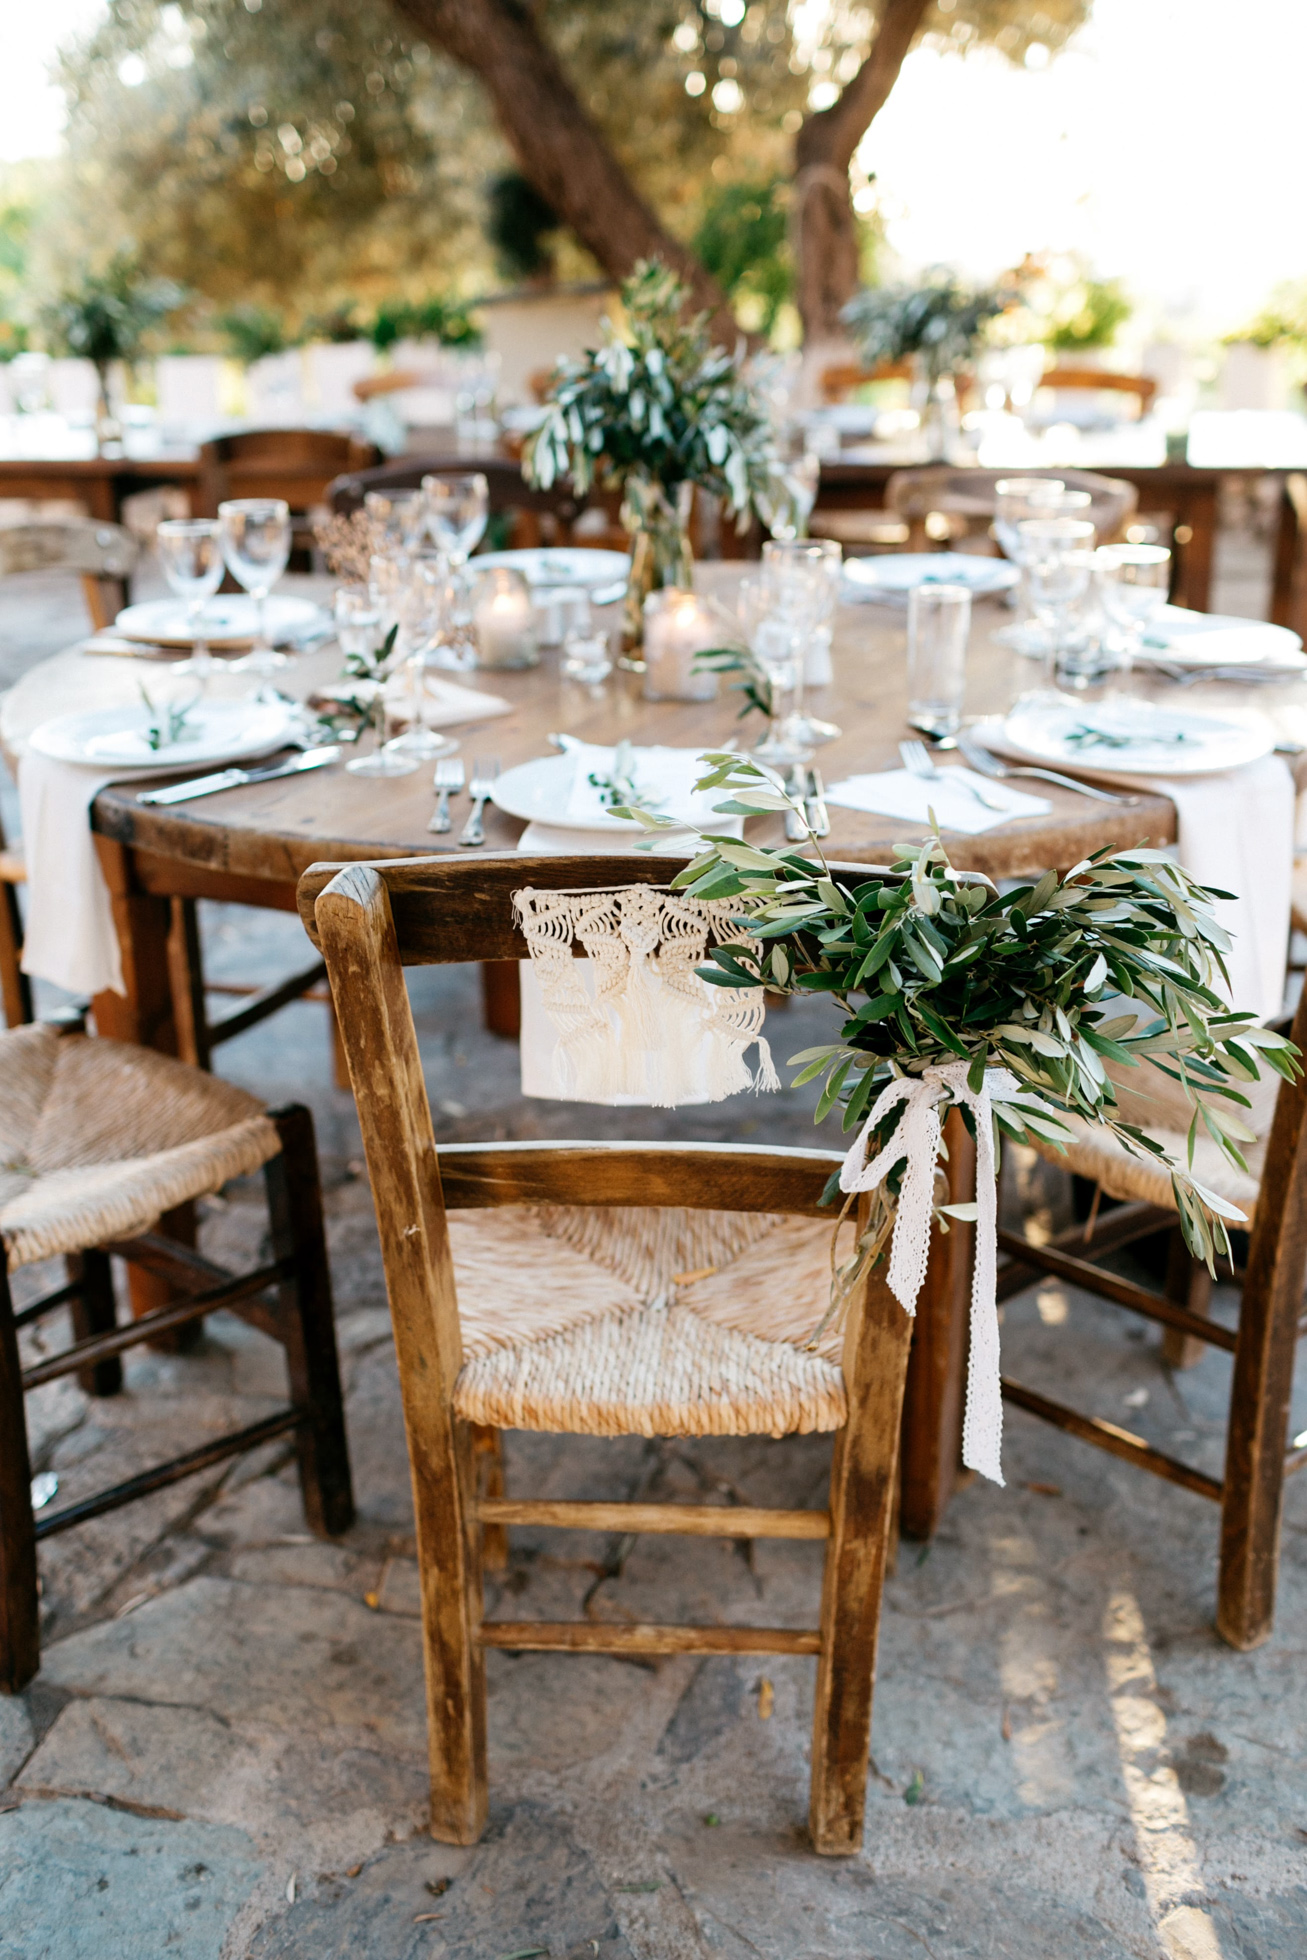 Wedding dinner setup and details in Agreco Farms, Grecotel, Crete, Greece.